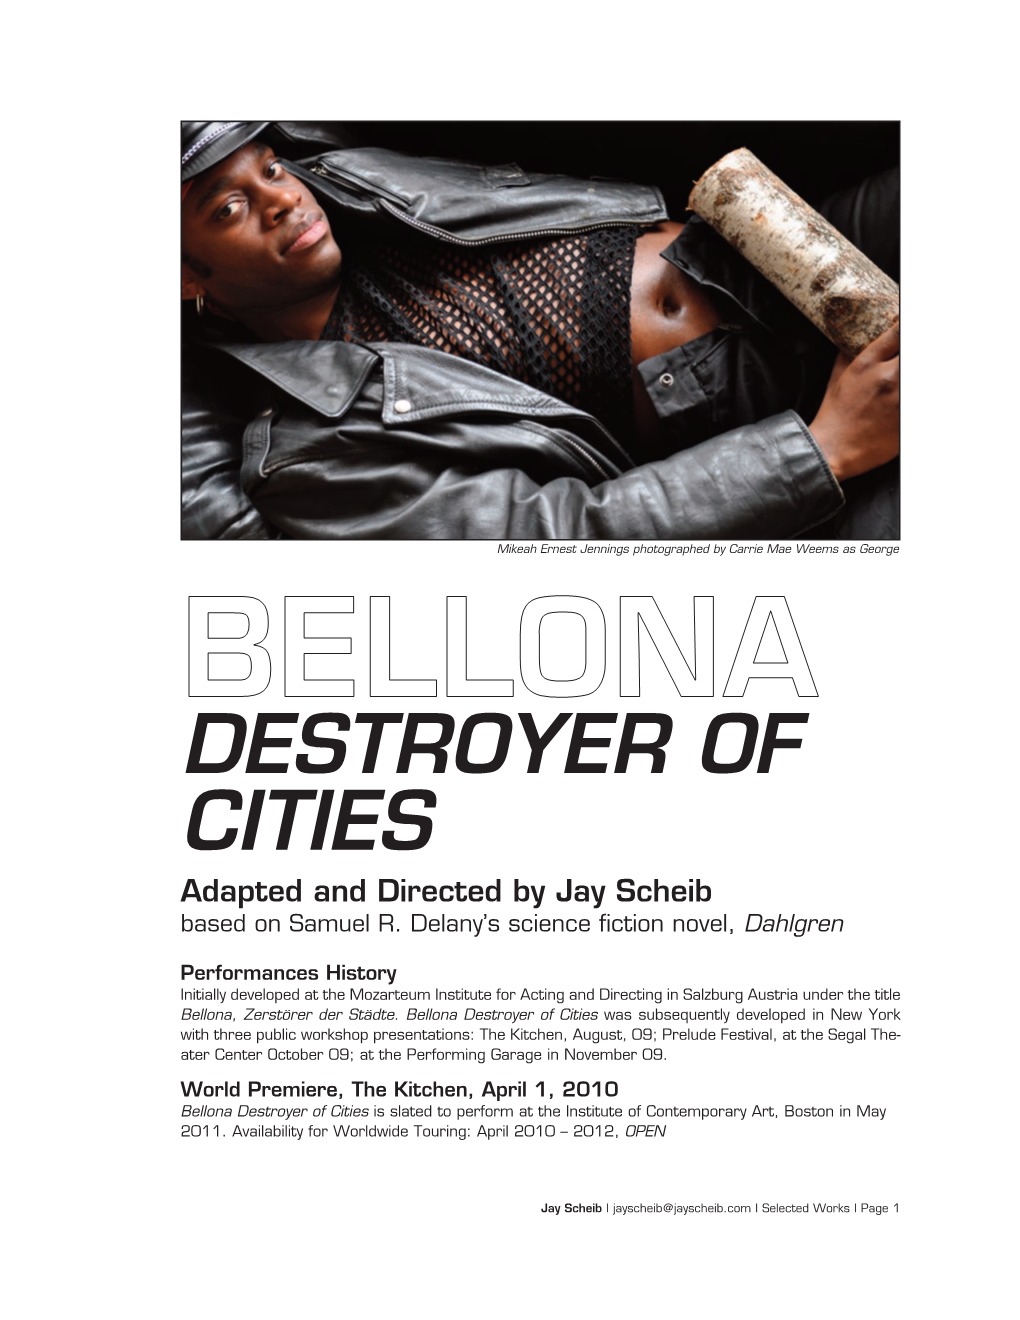 DESTROYER of CITIES Adapted and Directed by Jay Scheib Based on Samuel R